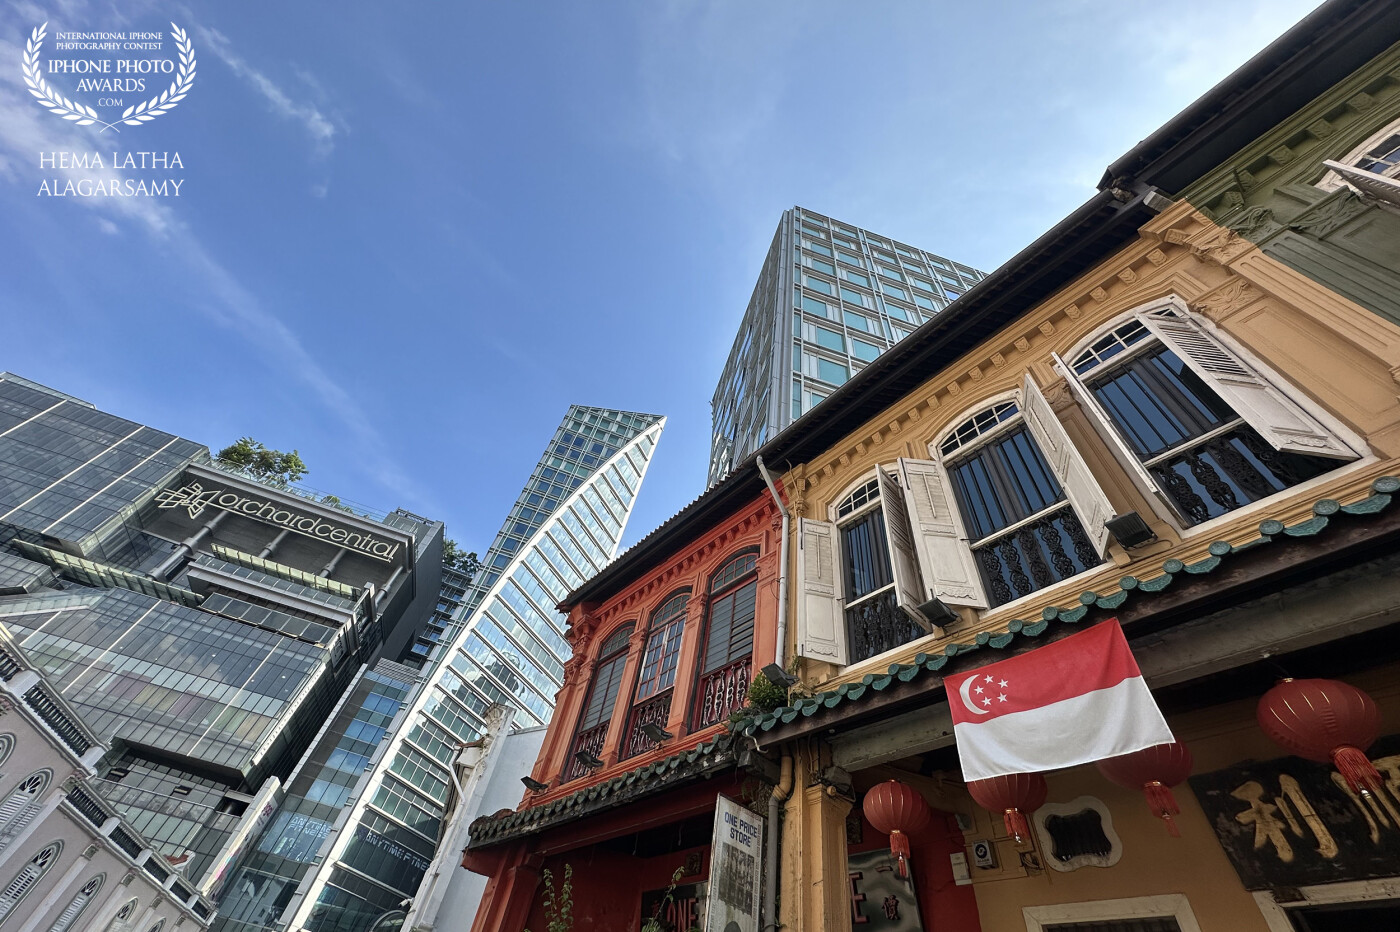 Welcome to Singapore, where traditional (historical) and modern architecture blend.<br />
📍Emerald Hill, Orchard, Singapore